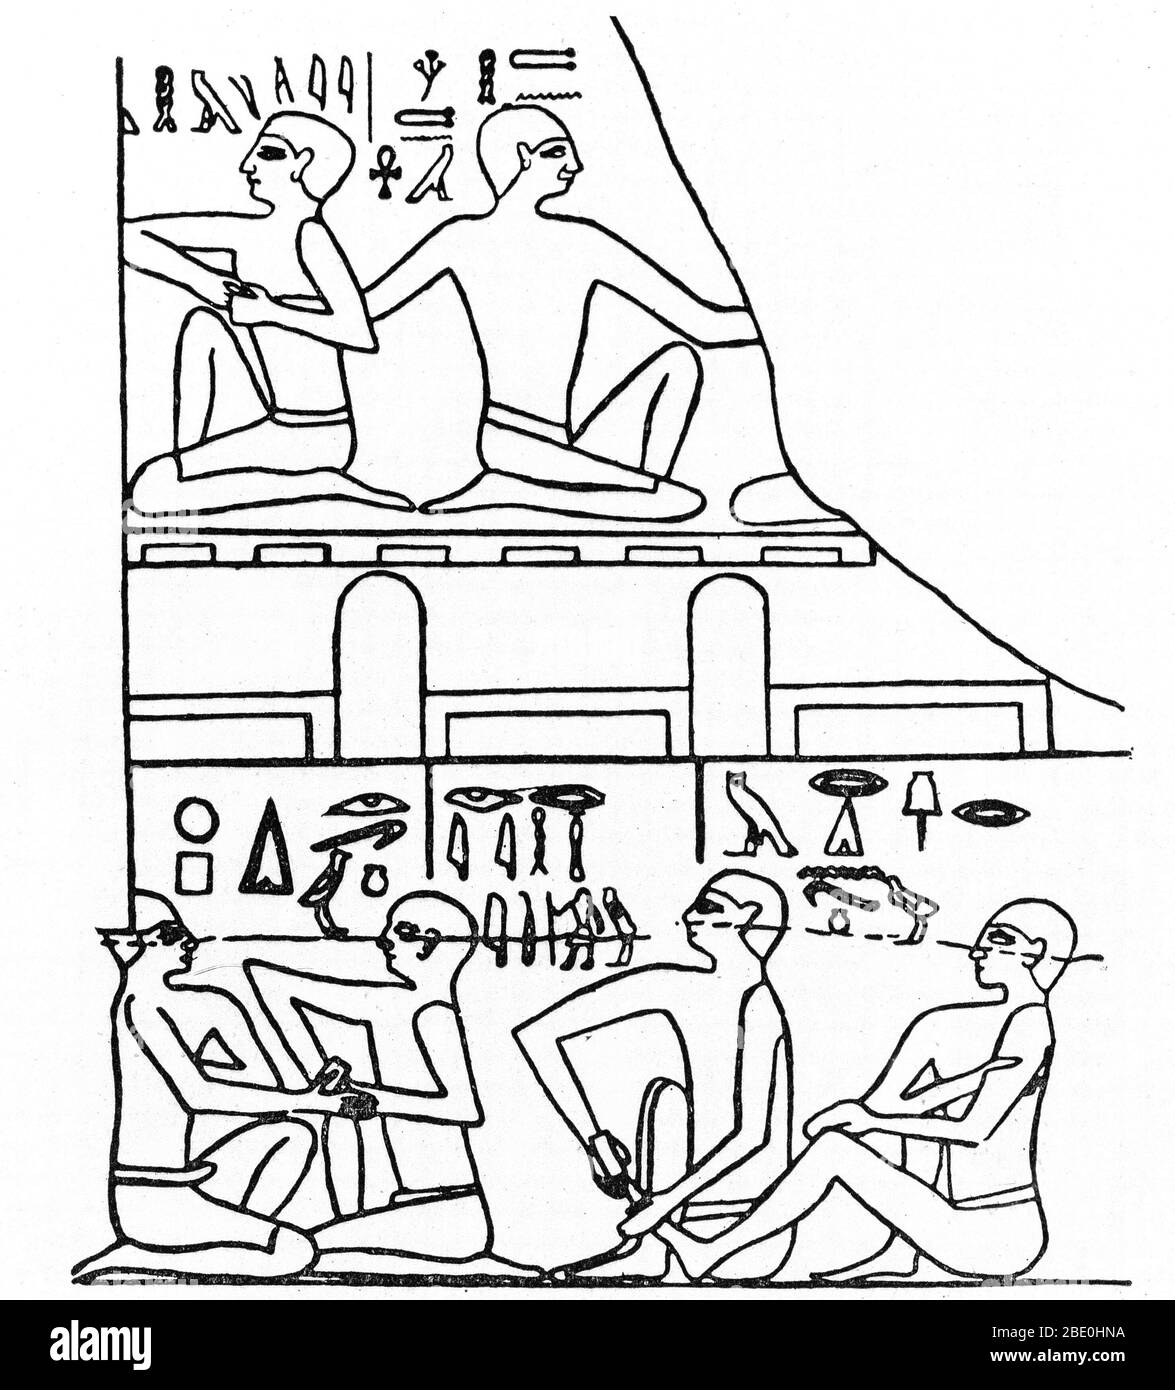 Illustration of how anesthesia may be produced by means of pressure. Representation of carving from 2500 BC. The medicine of the ancient Egyptians is some of the oldest documented. From the beginnings of the civilization in the late fourth millennium BC until the Persian invasion of 525 BC, Egyptian medical practice went largely unchanged but was highly advanced for its time, including simple non-invasive surgery, setting of bones, dentistry, and an extensive set of pharmacopoeia. Egyptian medical thought influenced later traditions, including the Greeks. Stock Photo